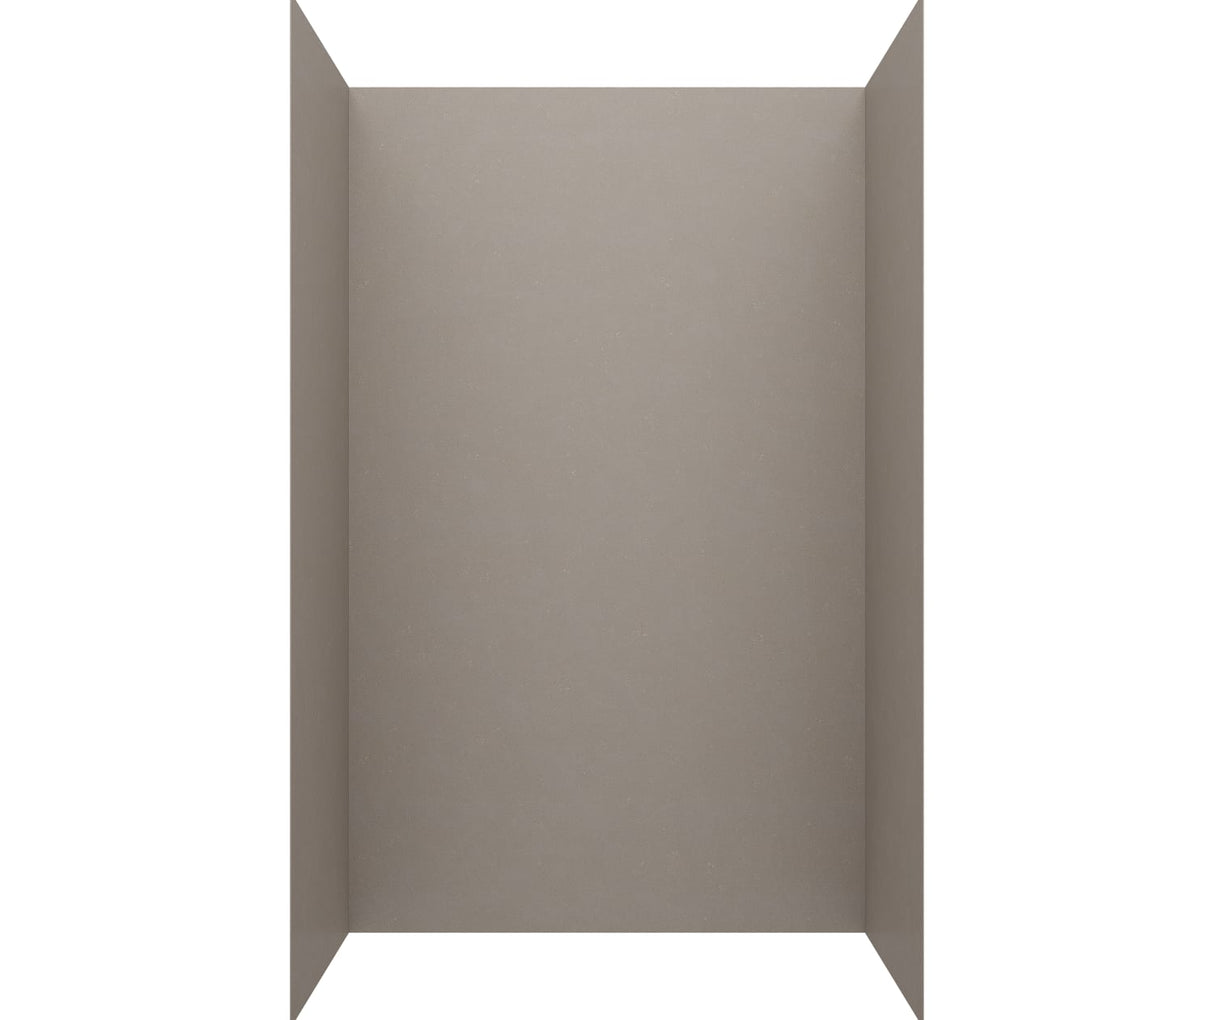 Swanstone SMMK96-3636 36 x 36 x 96 Swanstone Smooth Glue up Shower Wall Kit in Clay SMMK963636.212